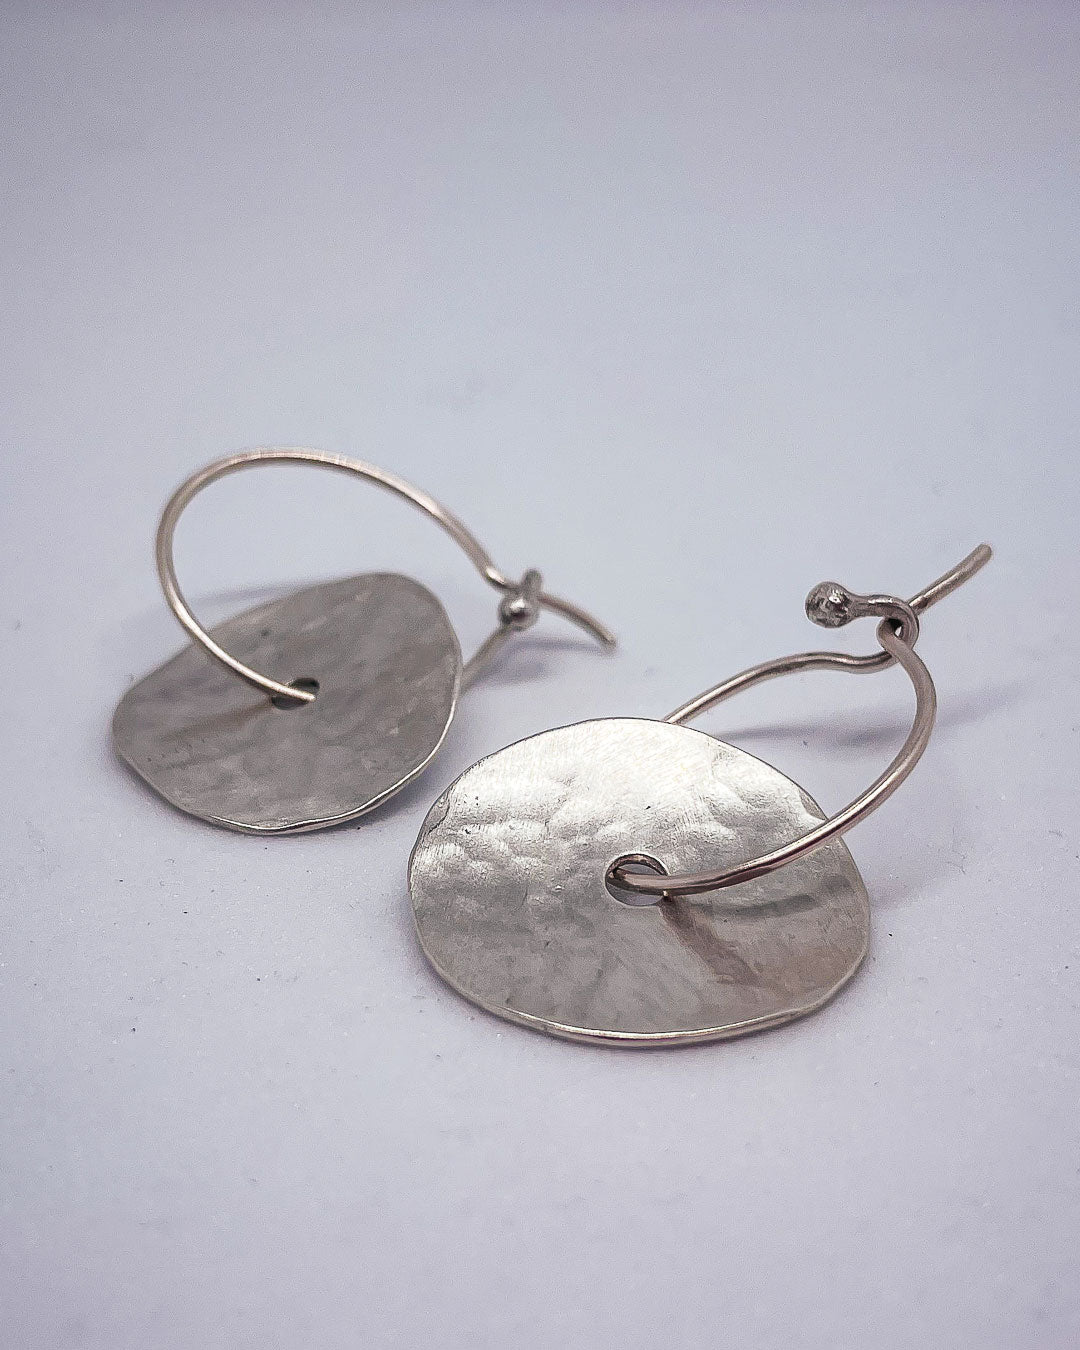 A closeup of a pair of discs of Sterling Silver that sits on a hoop earring